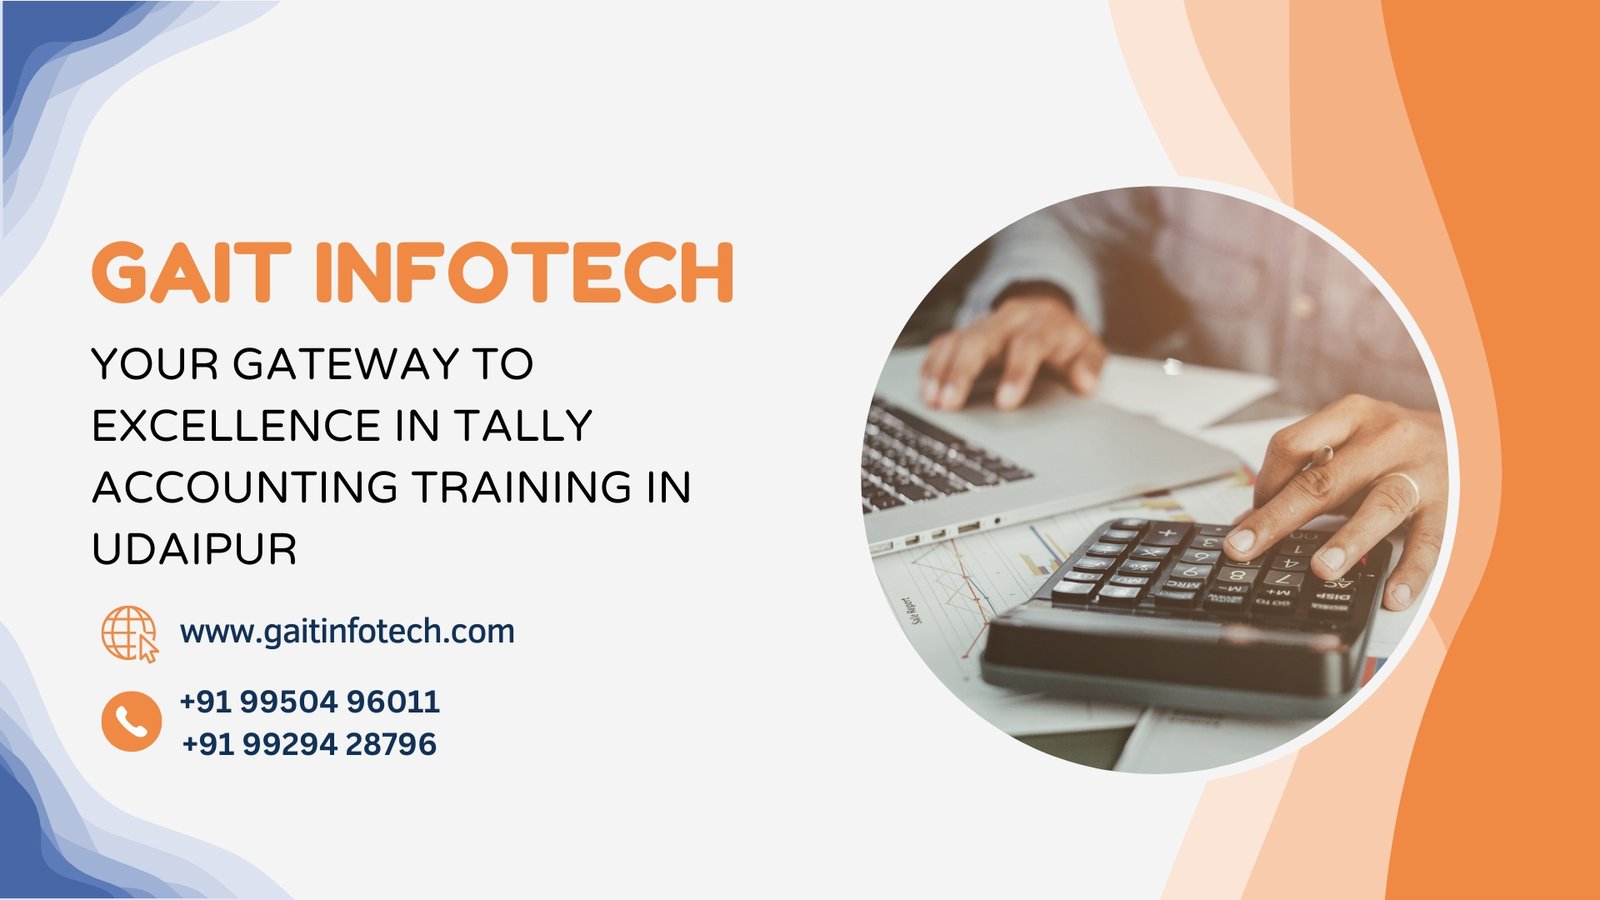 Gait Infotech: Your Gateway to Excellence in Tally Accounting Training in Udaipur